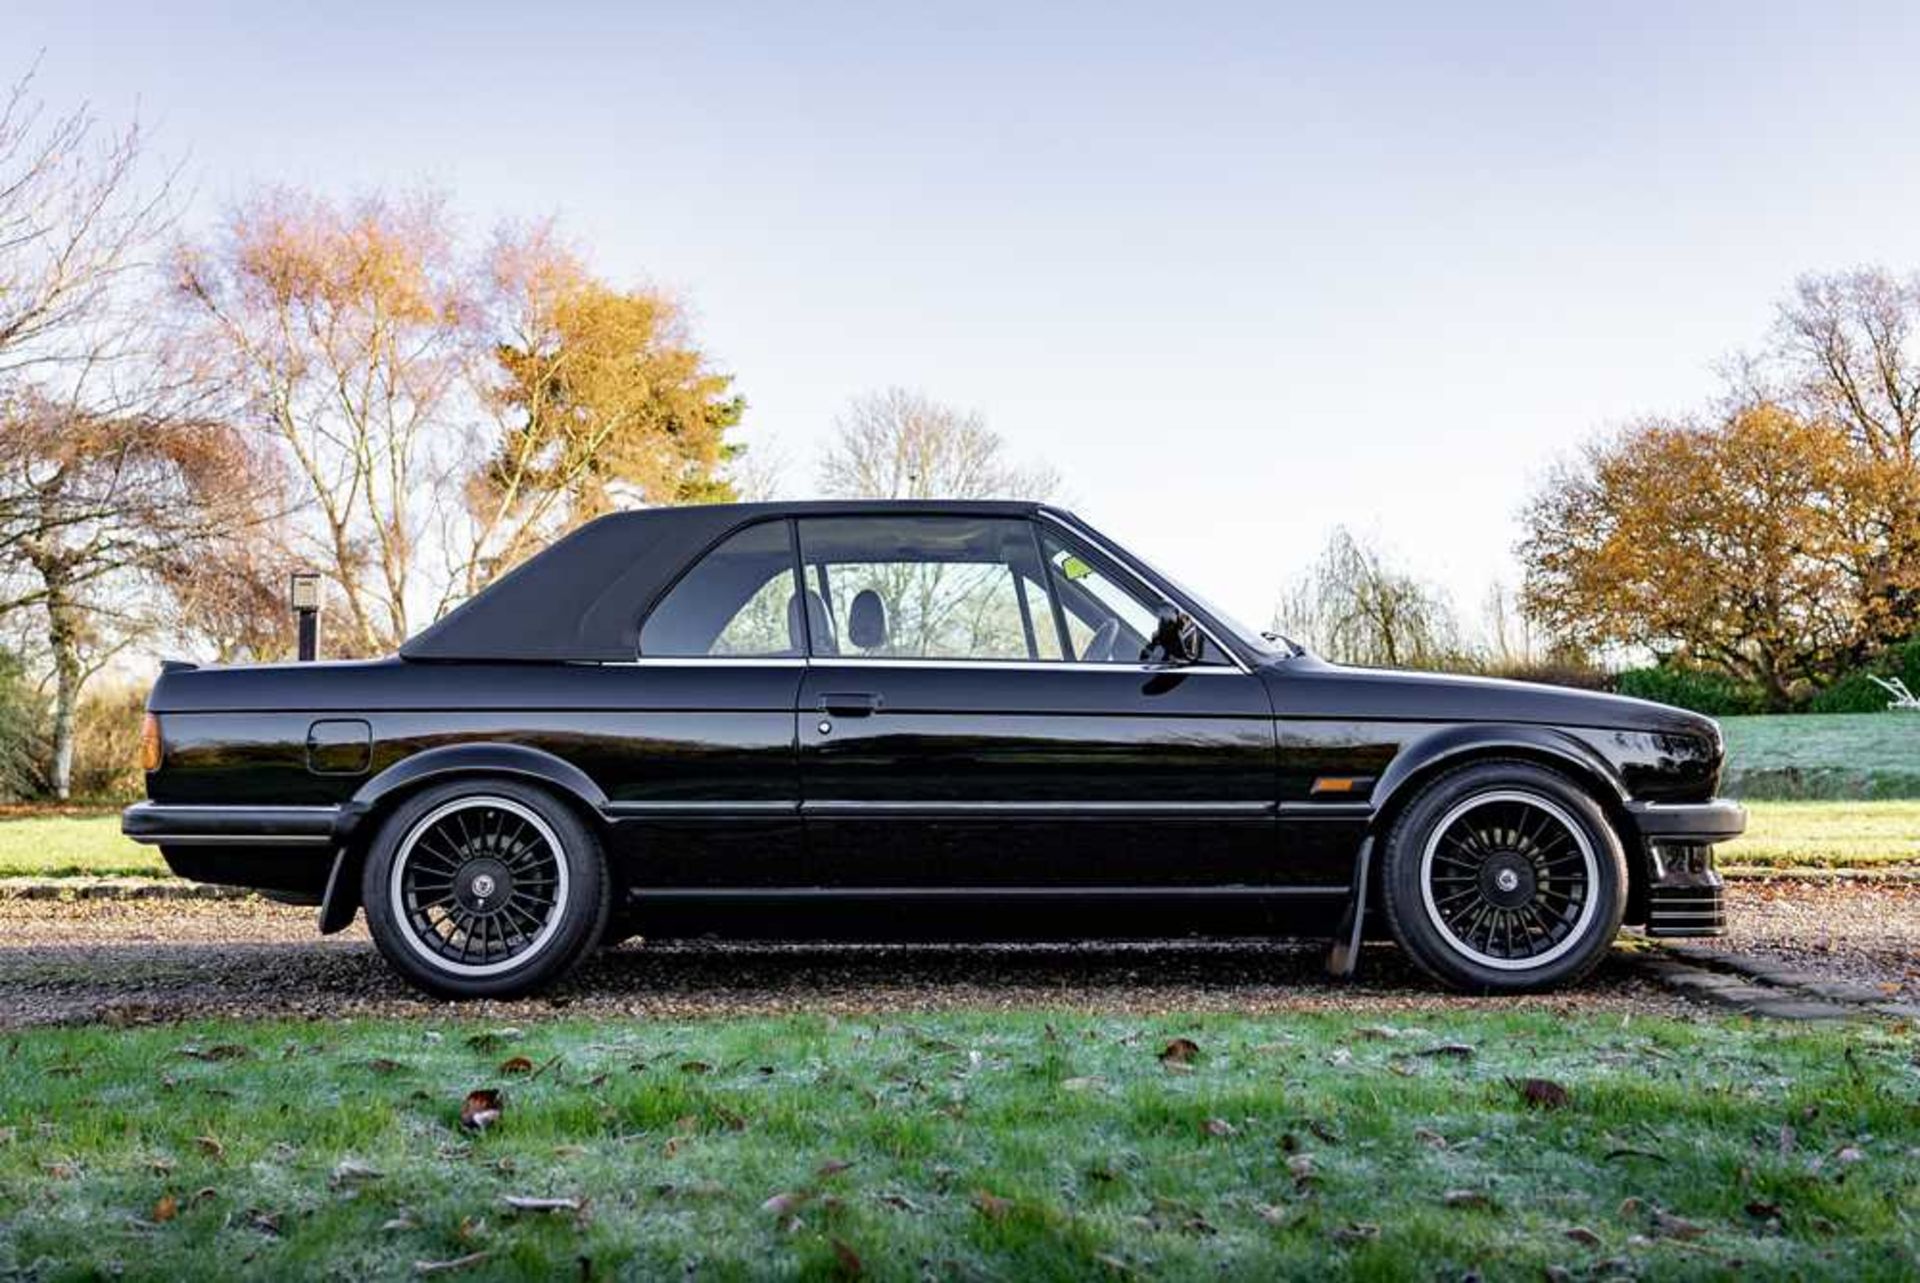 1989 BMW 320i Convertible Converted to Alpina 328i Specification - Image 9 of 51